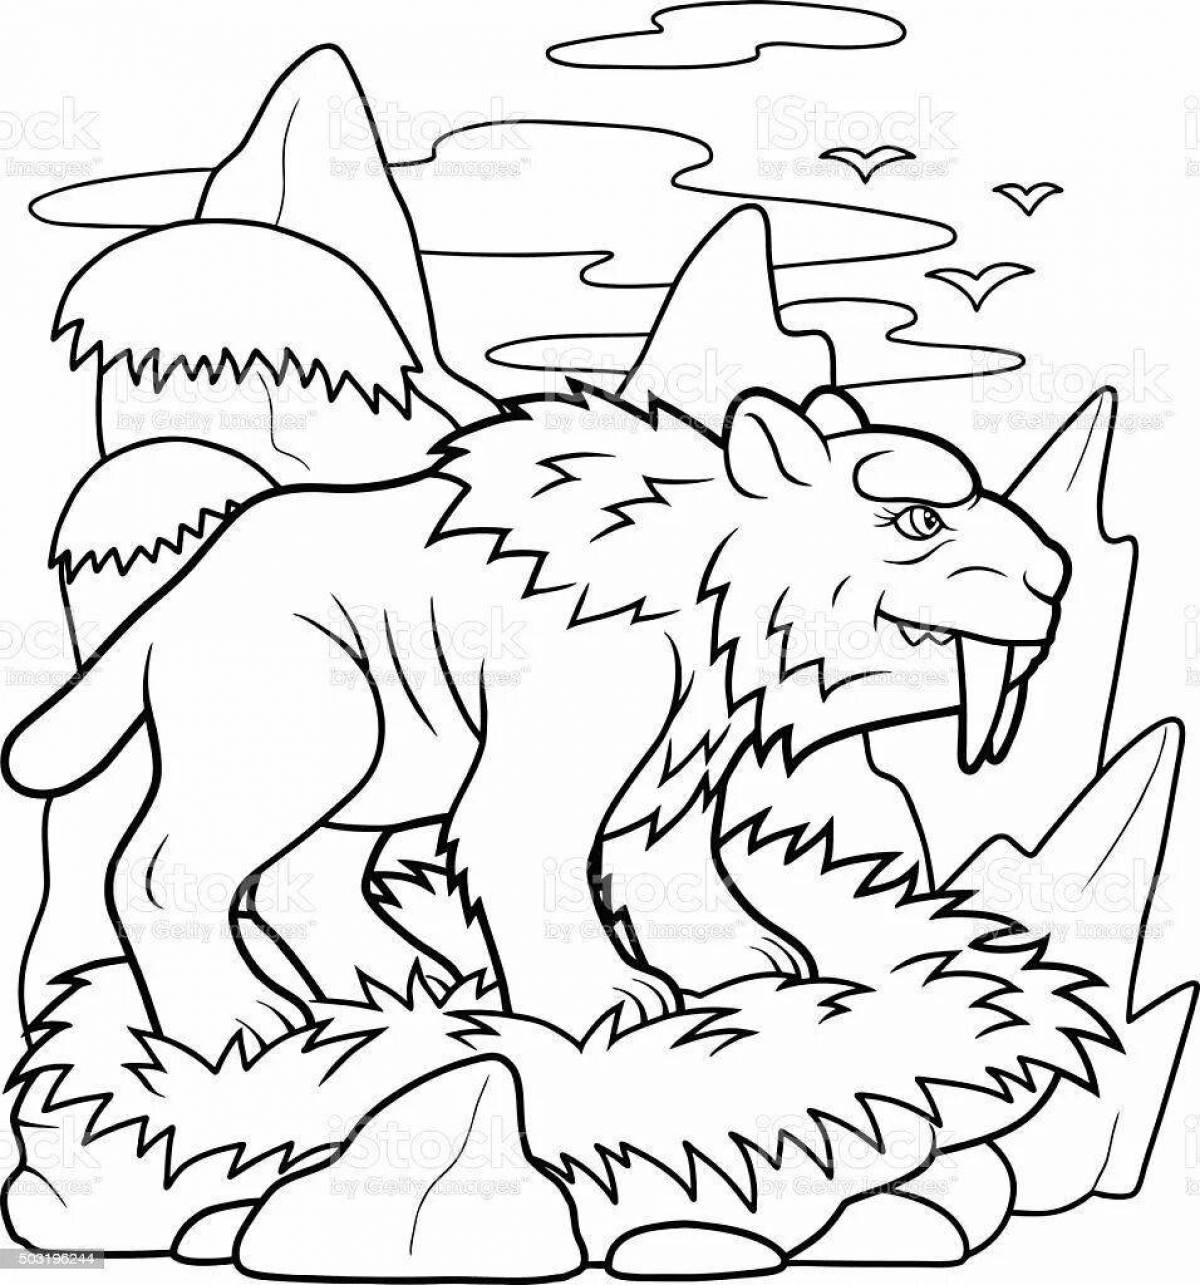 Awesome saber tooth tiger coloring book